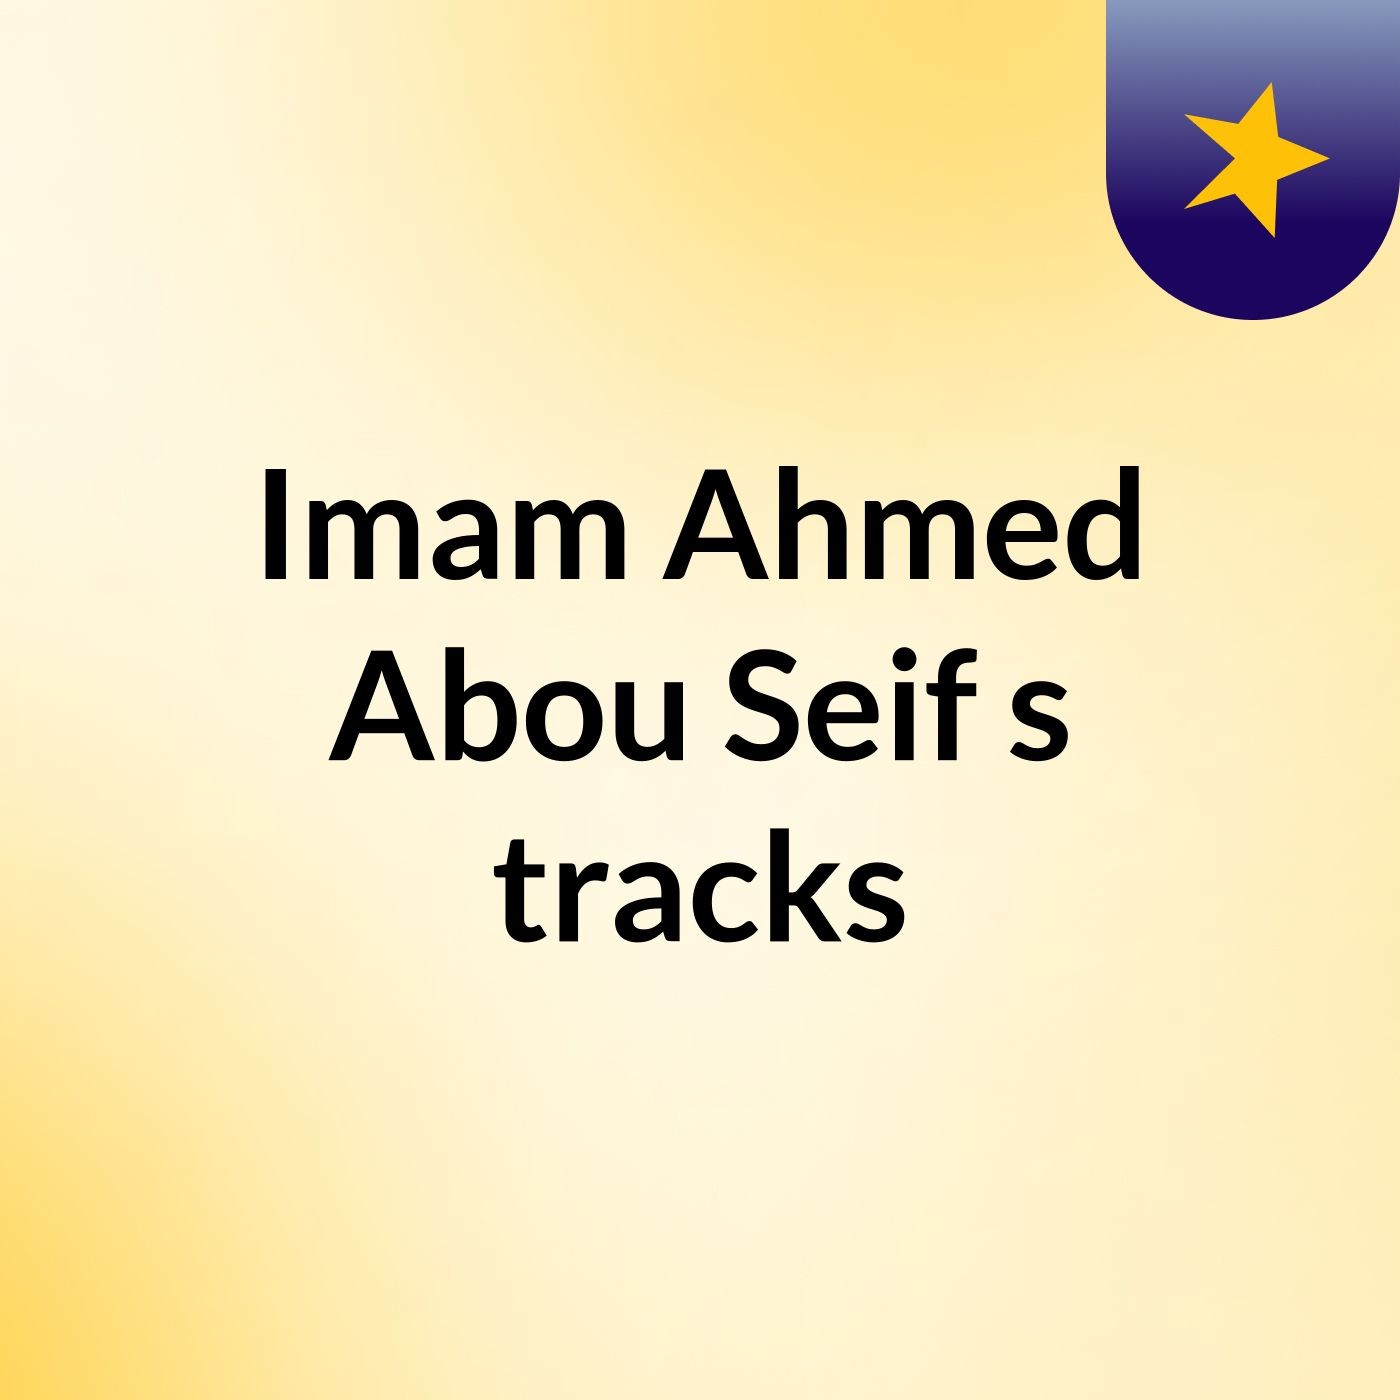 Imam Ahmed Abou Seif's tracks